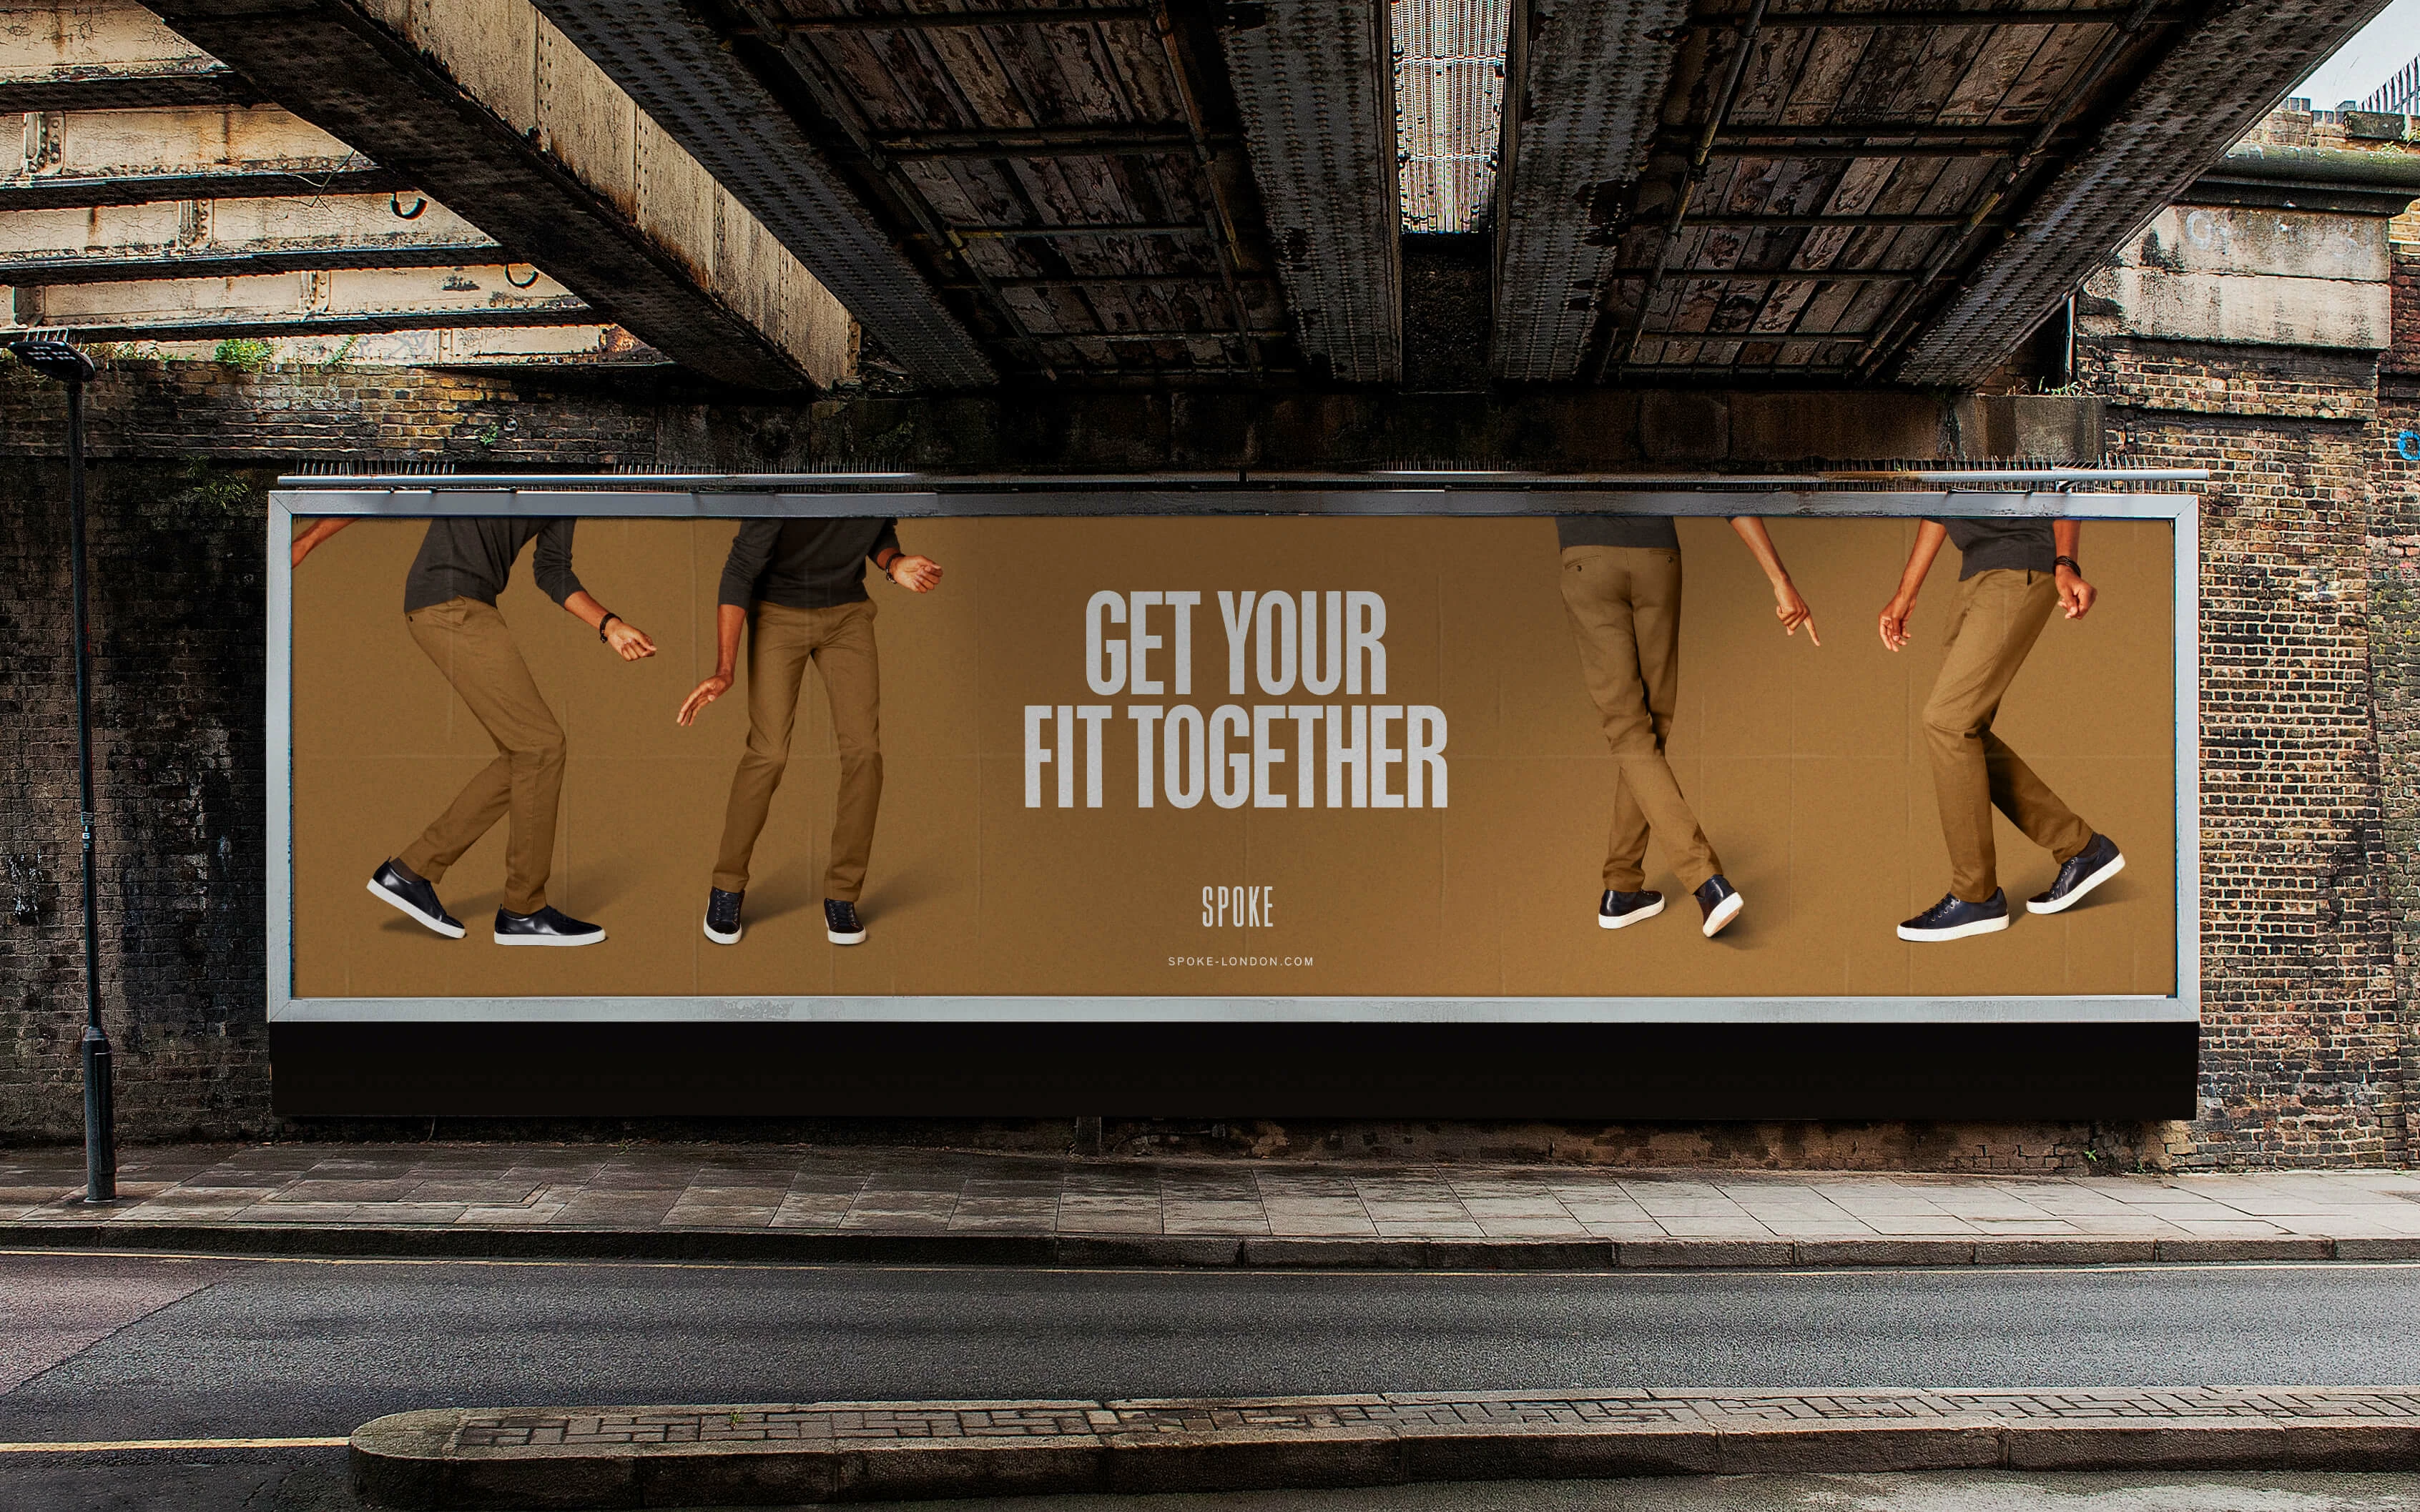 Spoke London billboard created by and courtesy of Onwards.Agency